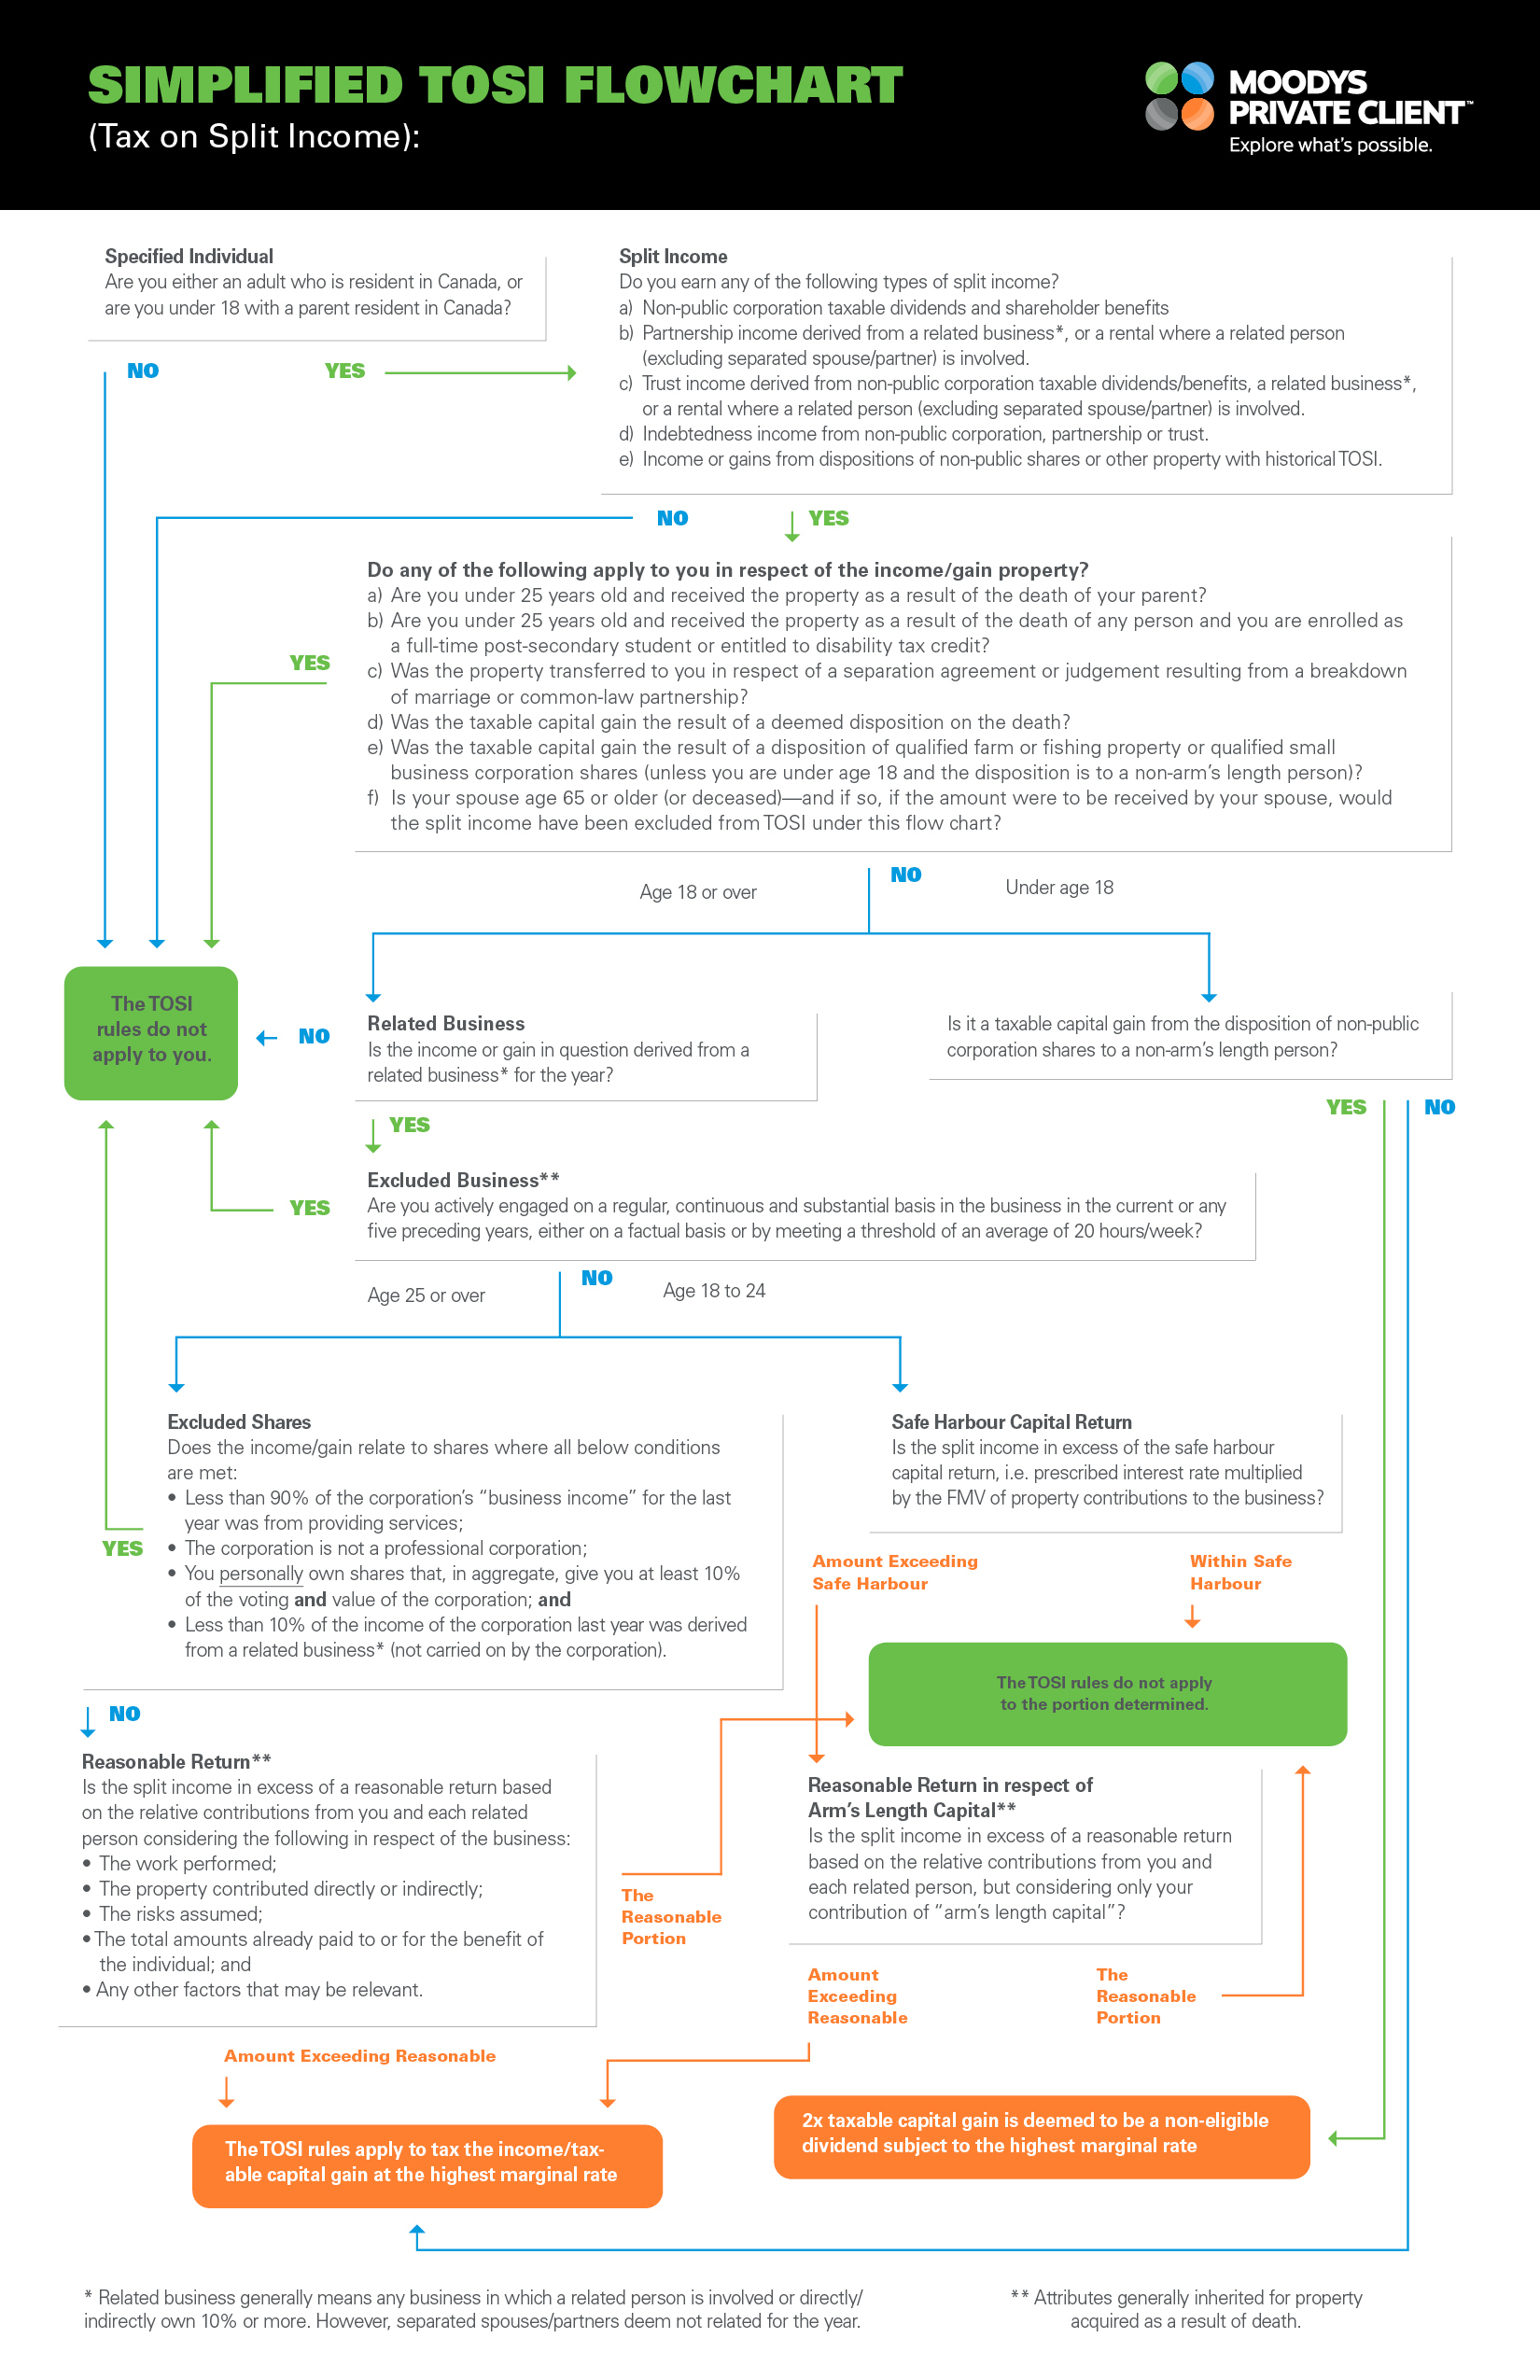 MPC_Income Sprinking Flowchart_210709_FINAL